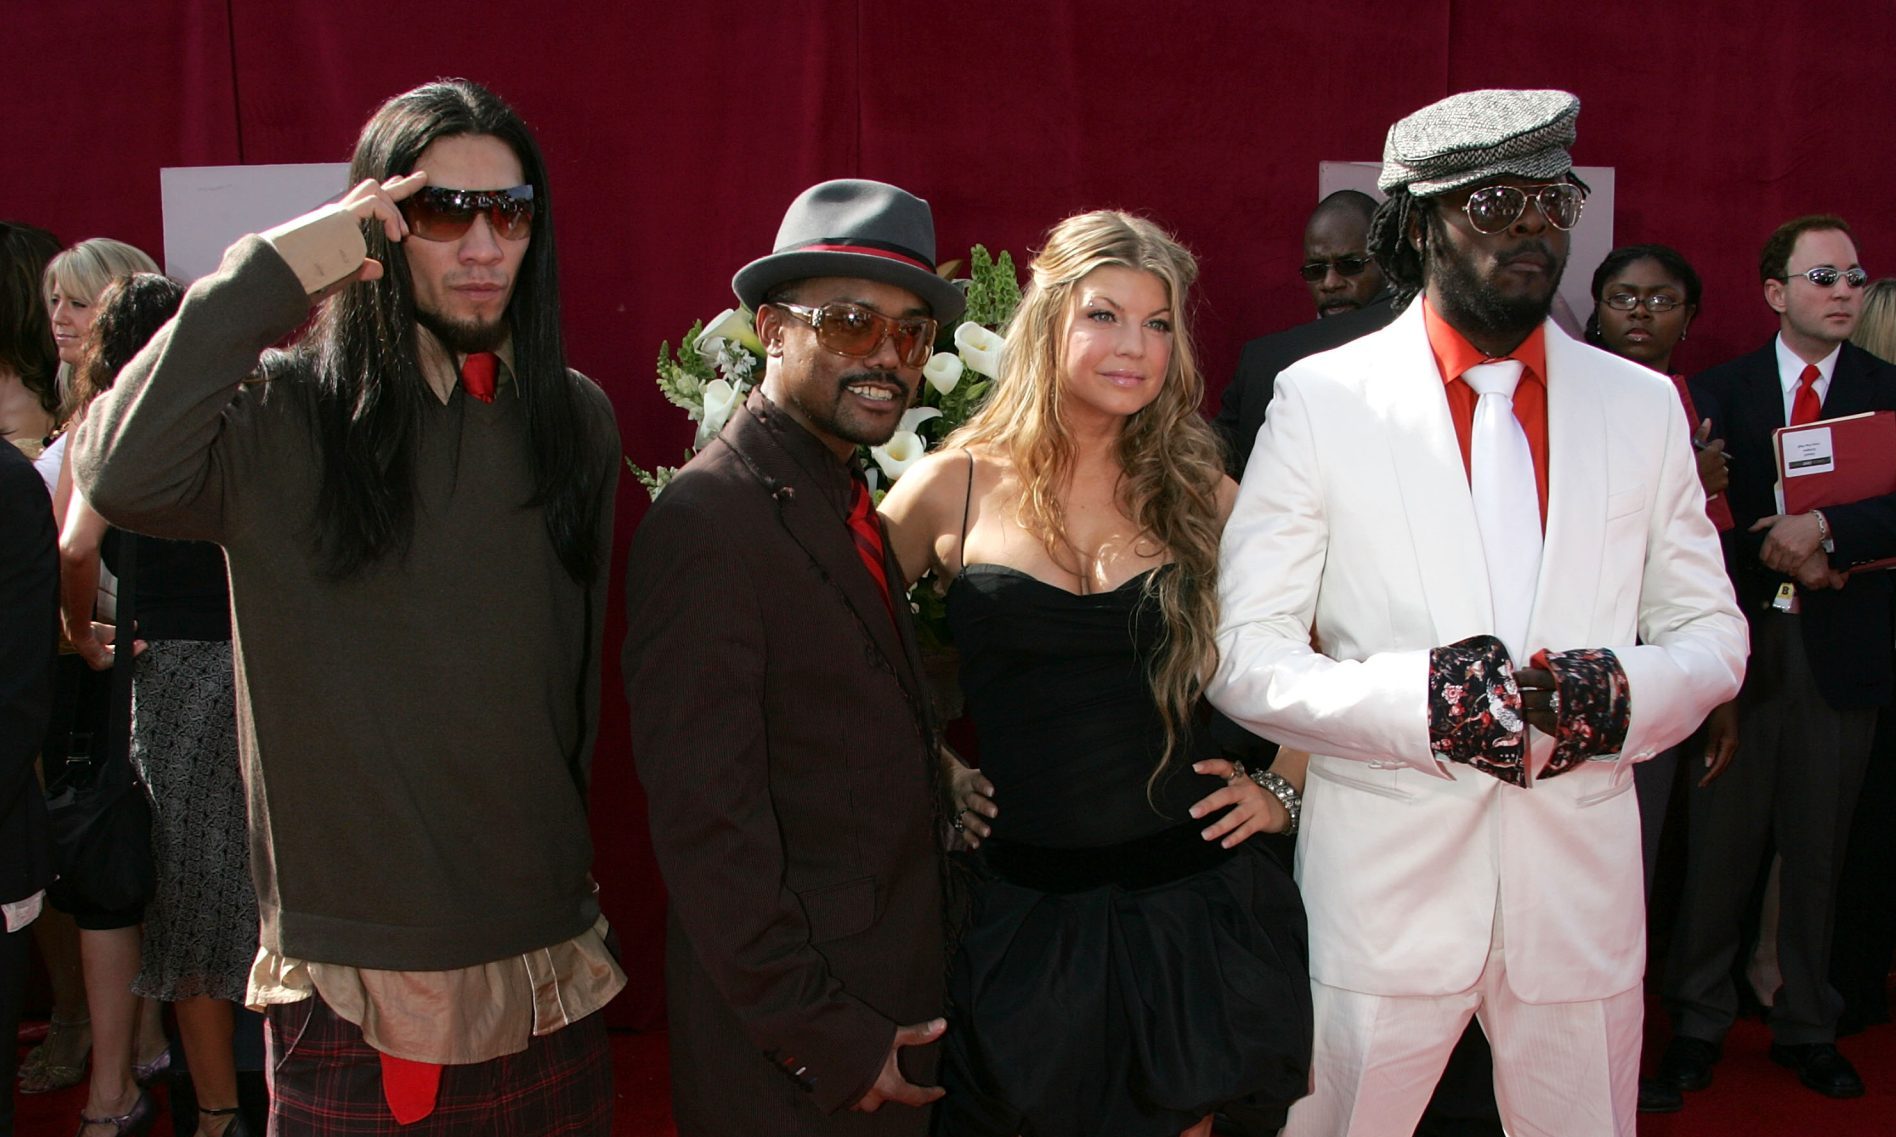 LISTEN: Black Eyed Peas Label Sues Toy Maker For Alleged Remix Of ‘My Humps’ To ‘My Poops’